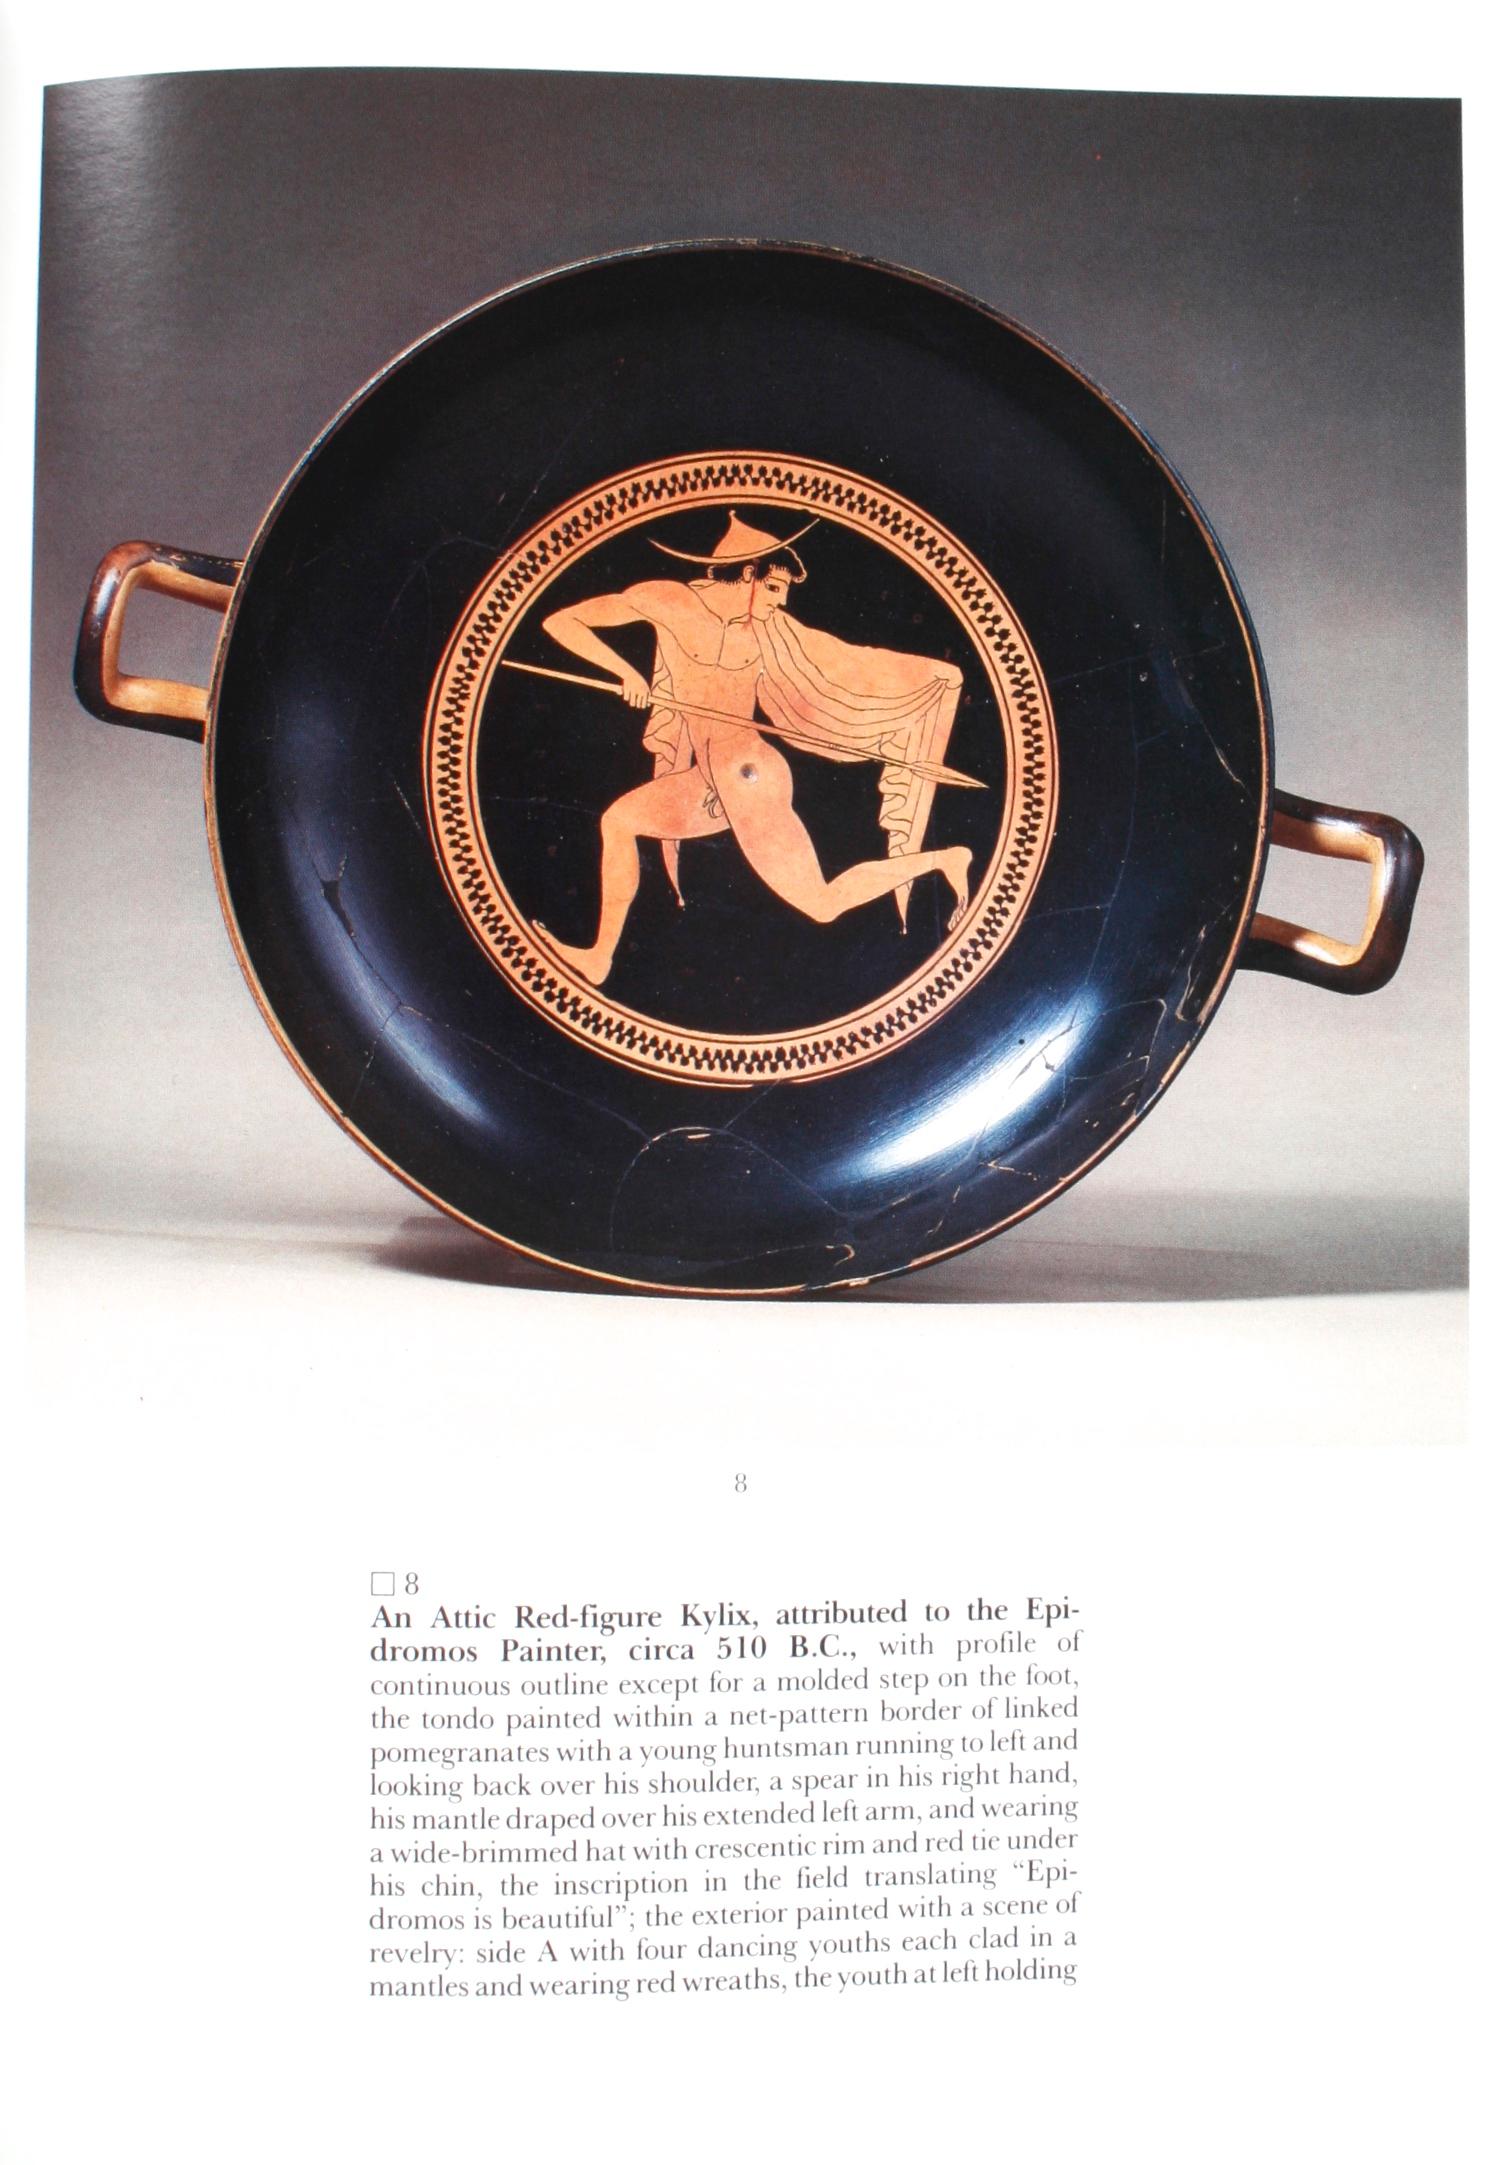 Paper Sotheby's, Hunt Collection Highly Important Greek Vases Roman & Etruscan Bronzes For Sale